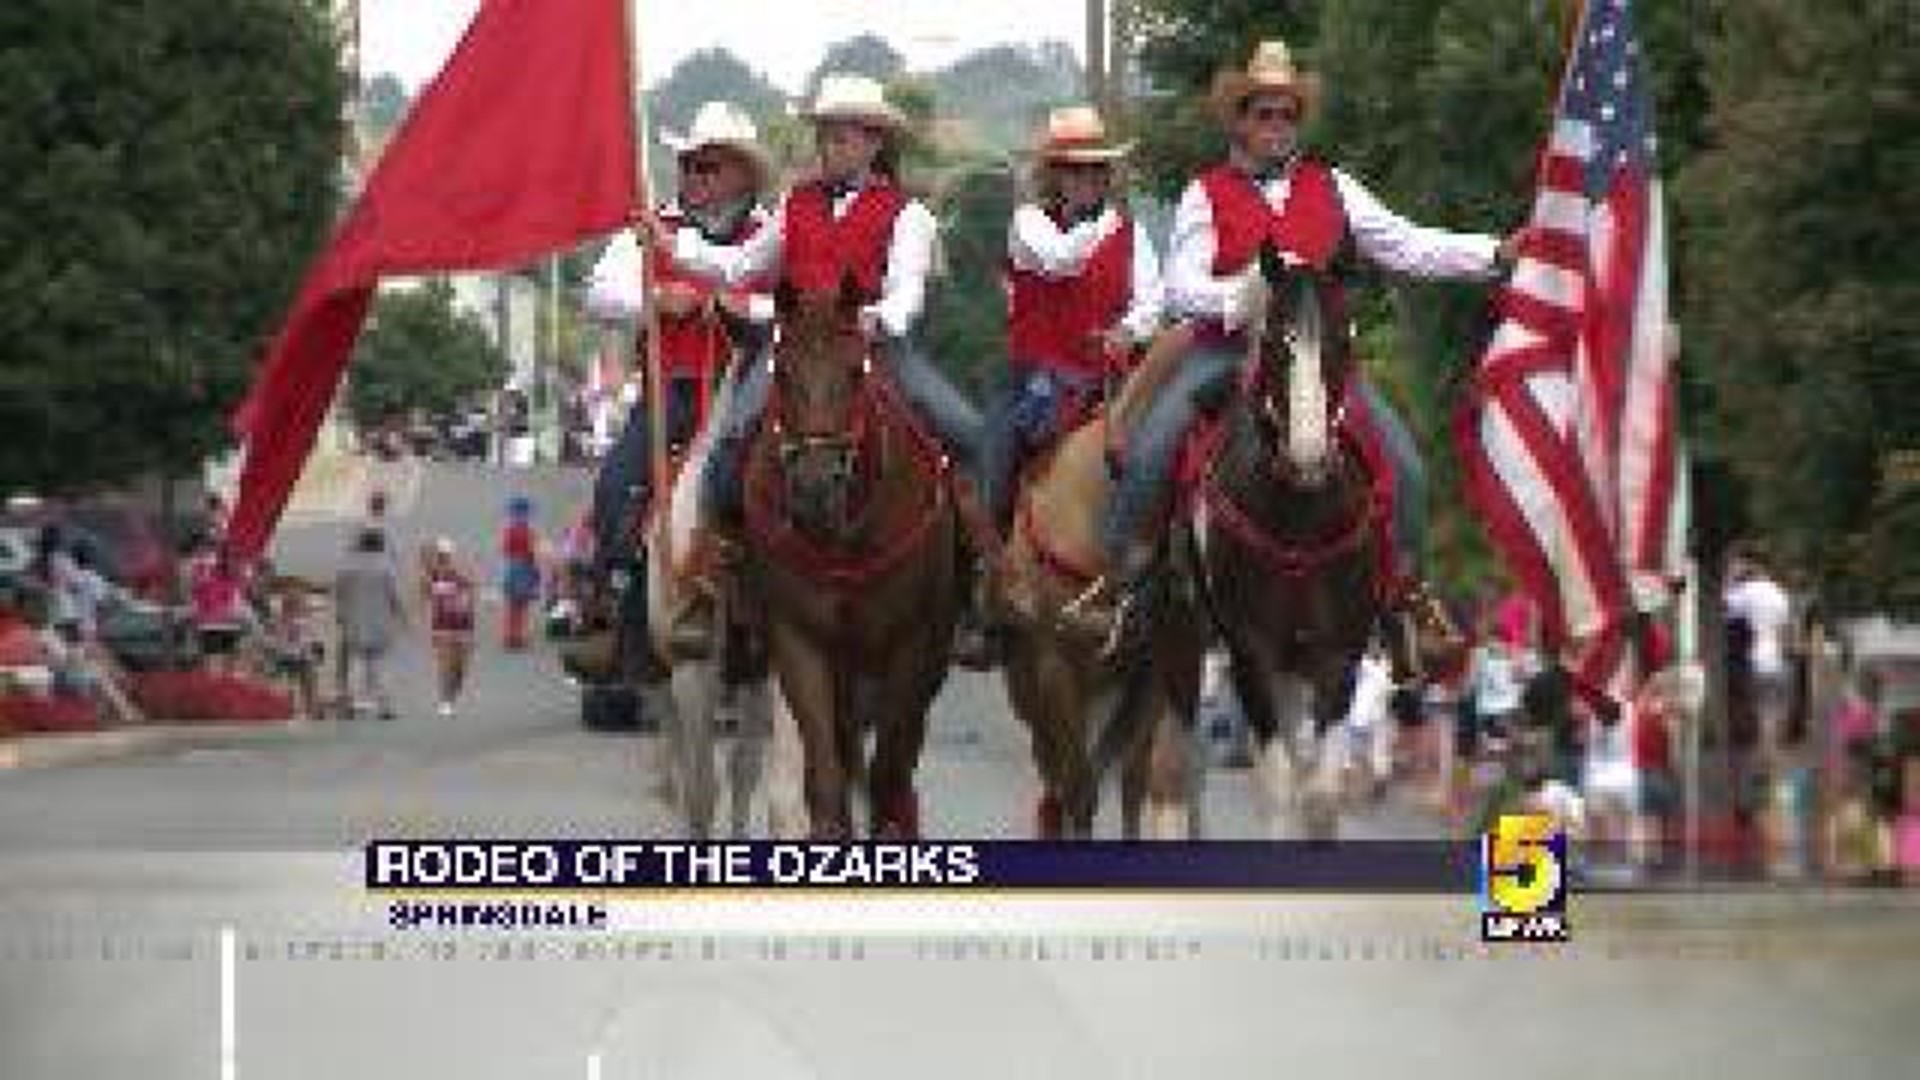 Rodeo of the Ozarks Parade